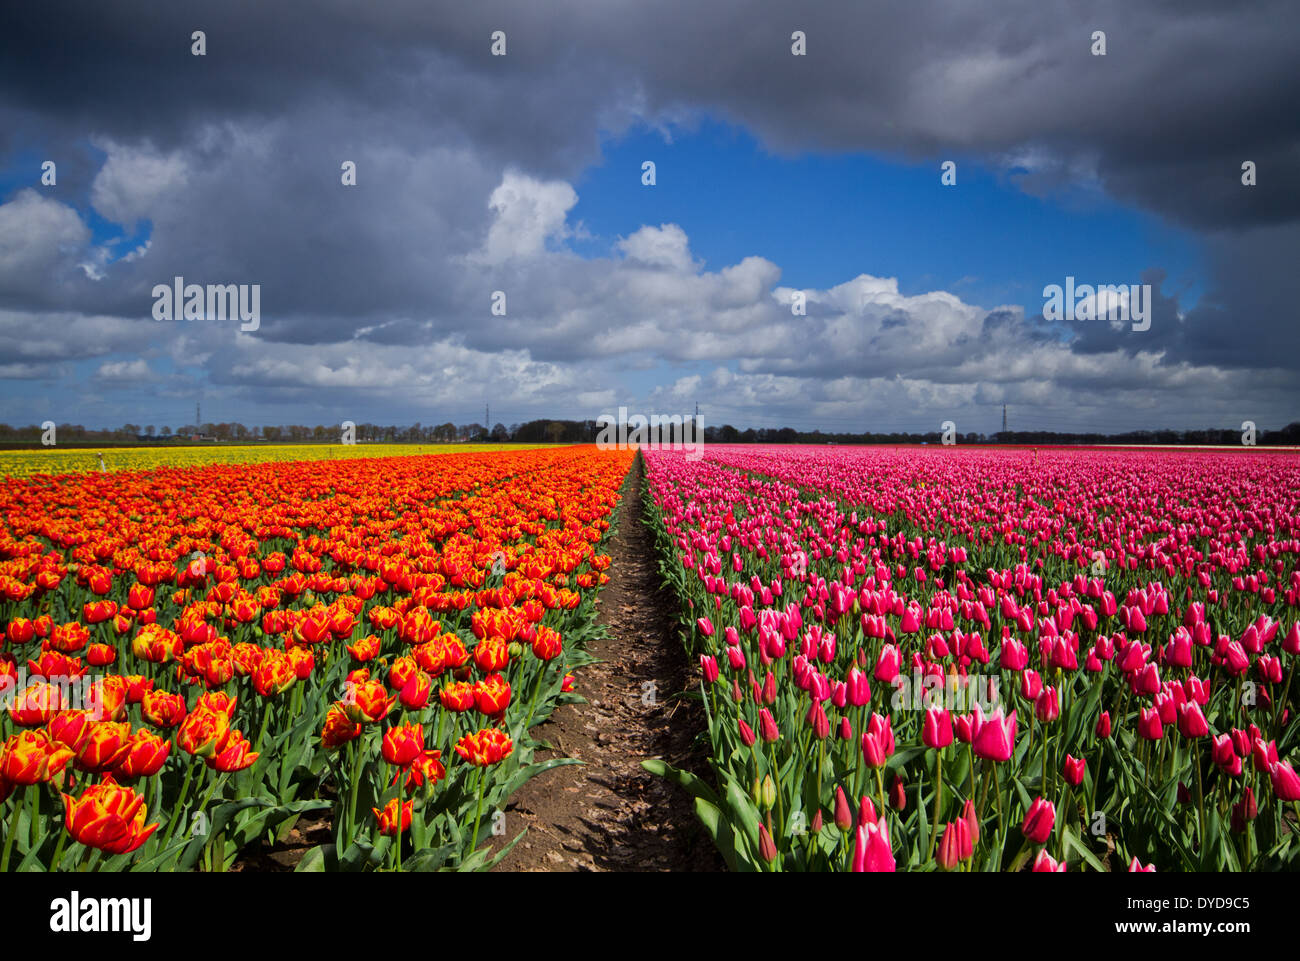 Field with pink, yellow and orange tulips under dark clouds Stock Photo